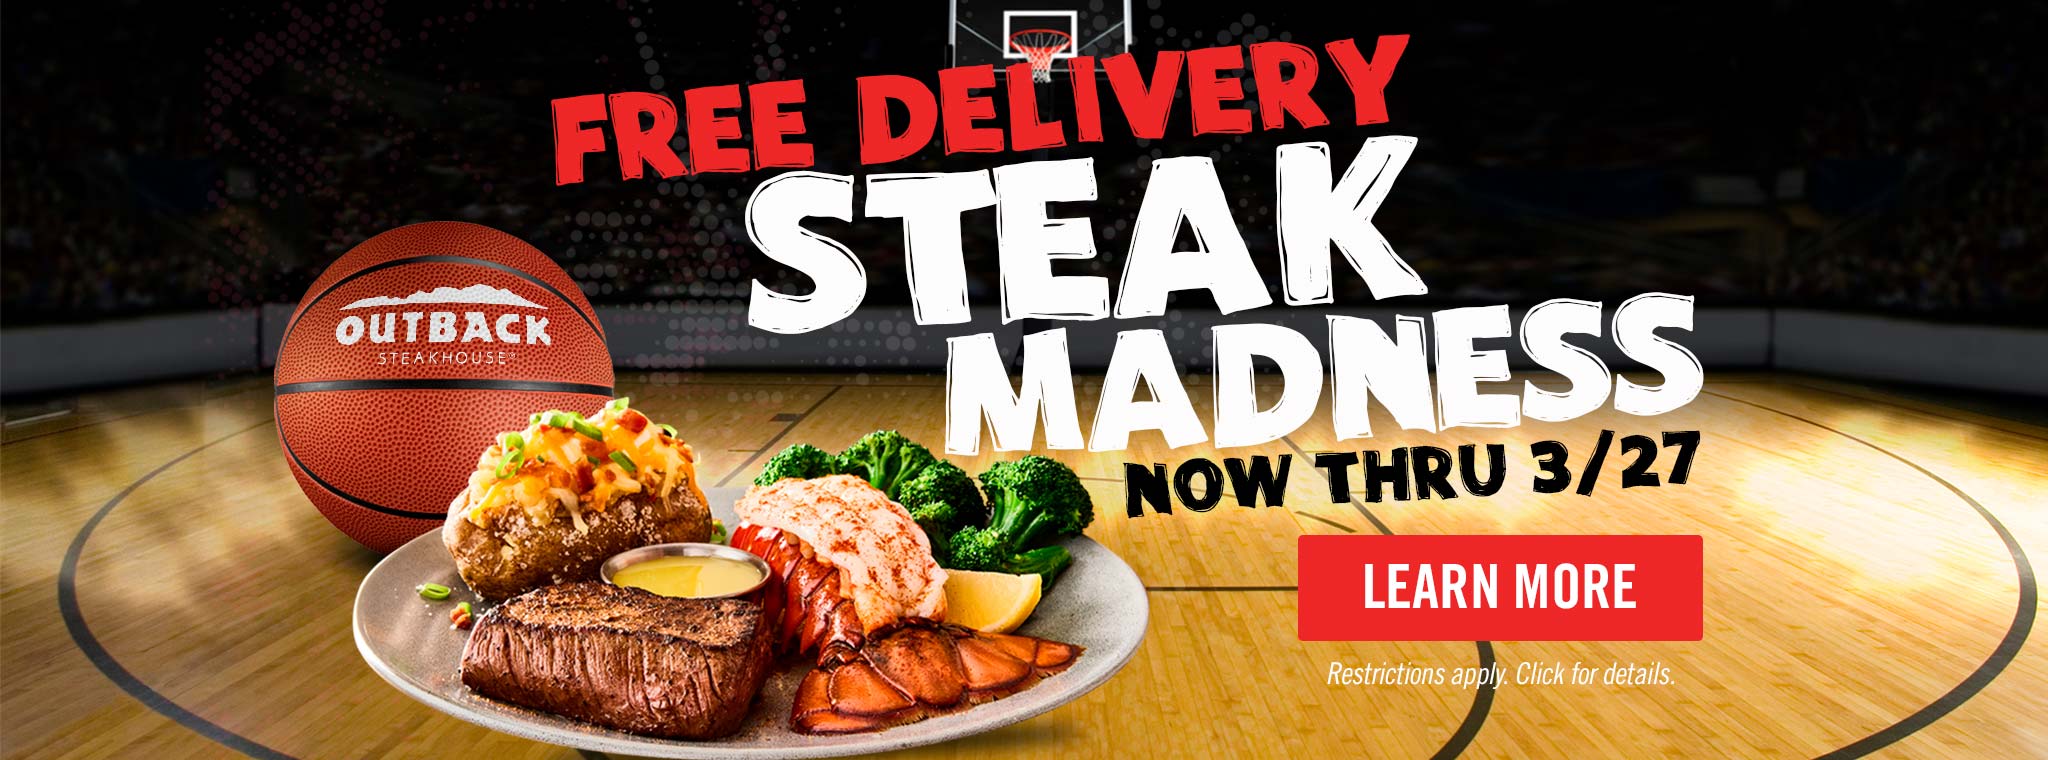 Enjoy FREE Delivery - It's Steak Madness now thru March 27!